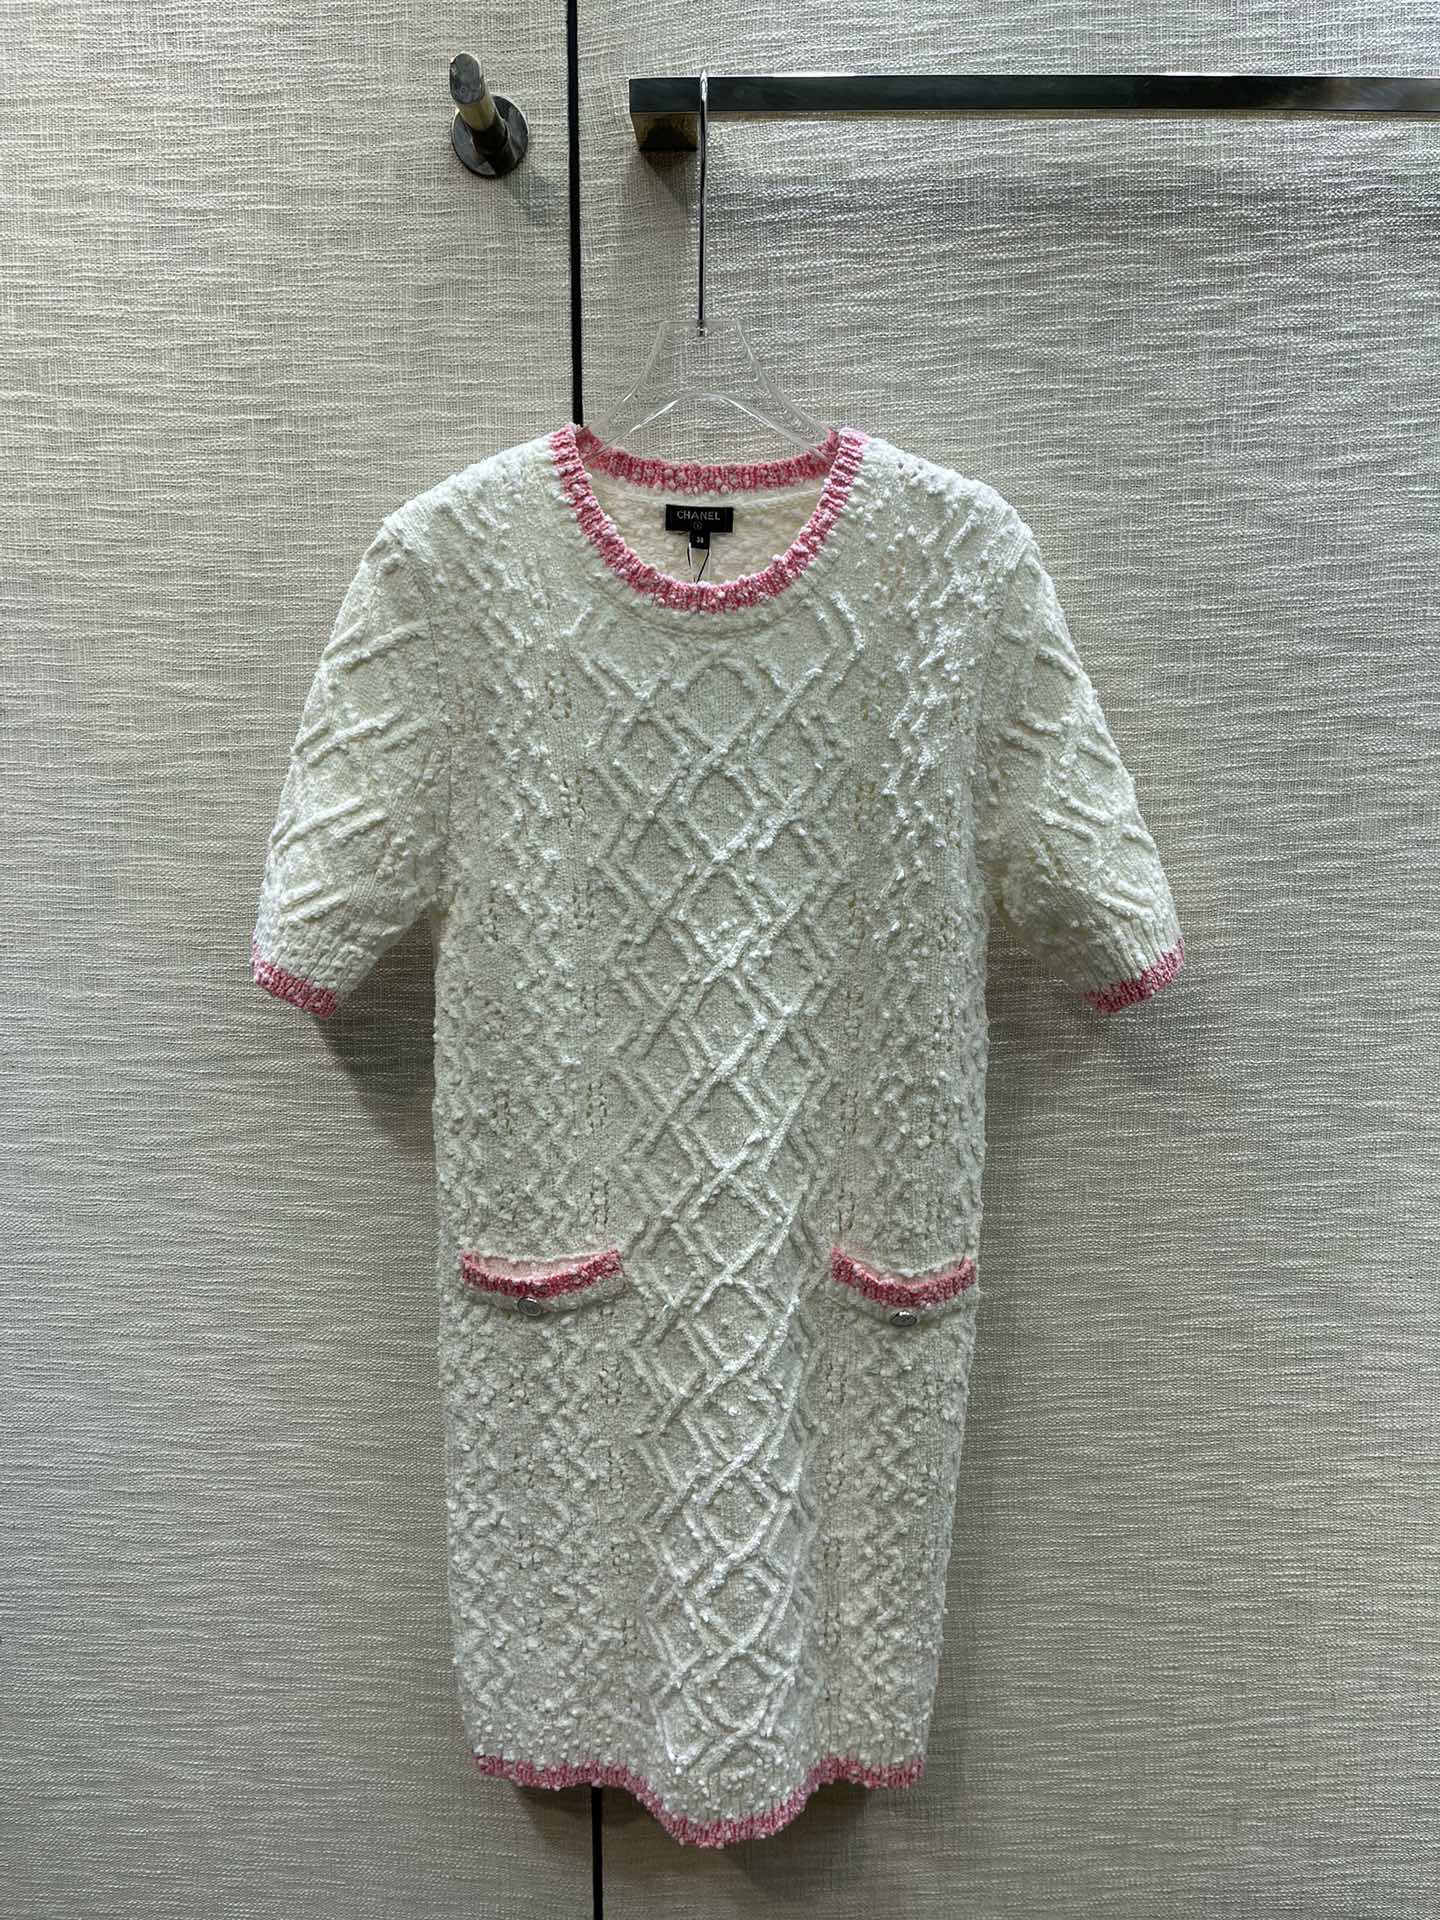 Chanel Clothing Dresses Openwork Knitting Spring Collection